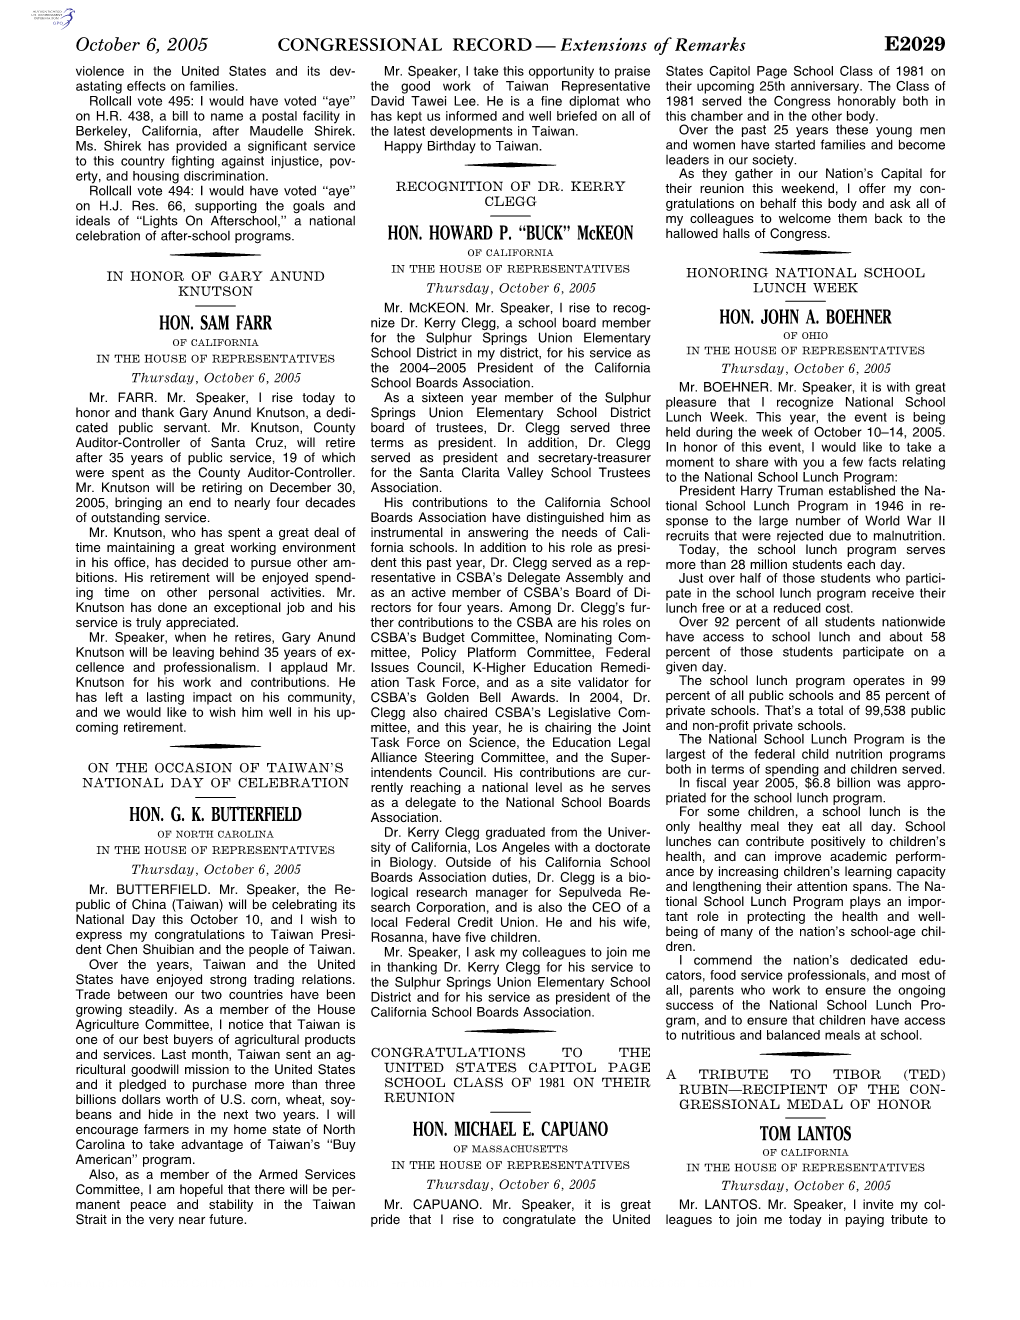 CONGRESSIONAL RECORD— Extensions of Remarks E2029 HON. SAM FARR HON. G. K. BUTTERFIELD HON. HOWARD P. ''BUCK'' Mckeon